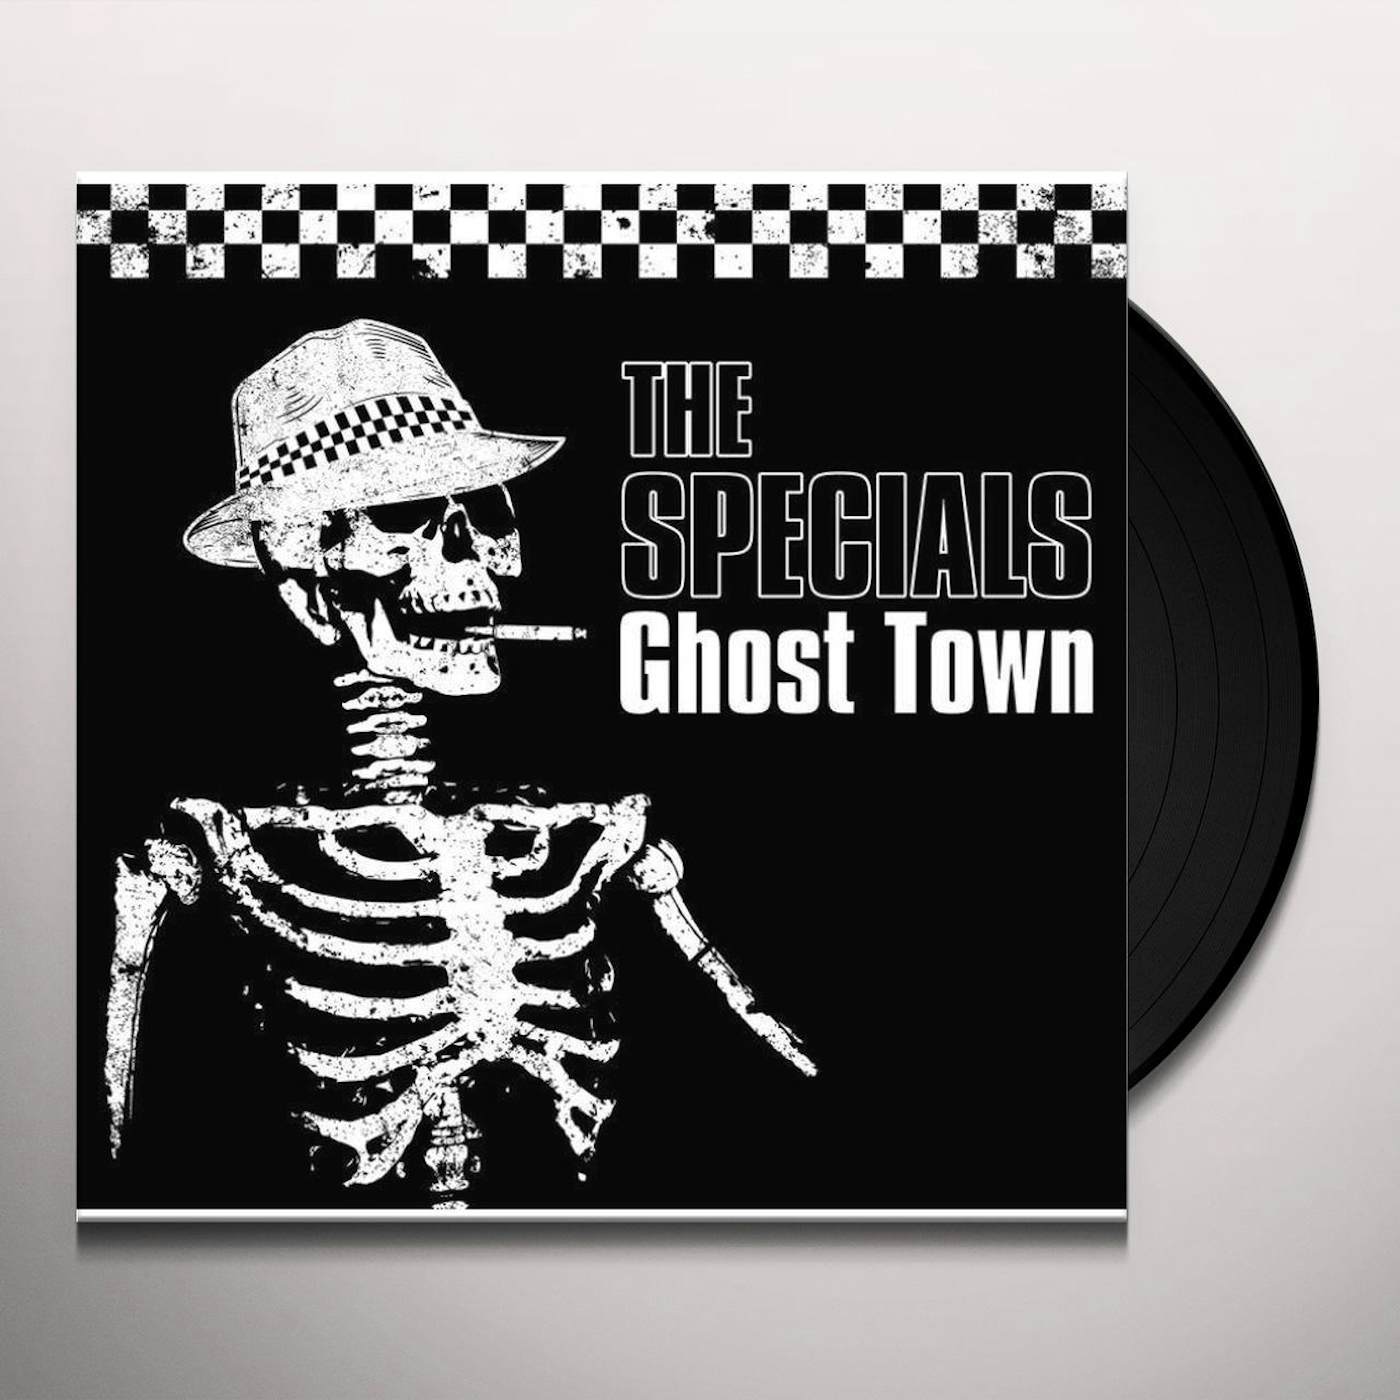 The Specials GHOST TOWN (40TH ANNIVERSARY HALF SPEED MASTER) Vinyl Record